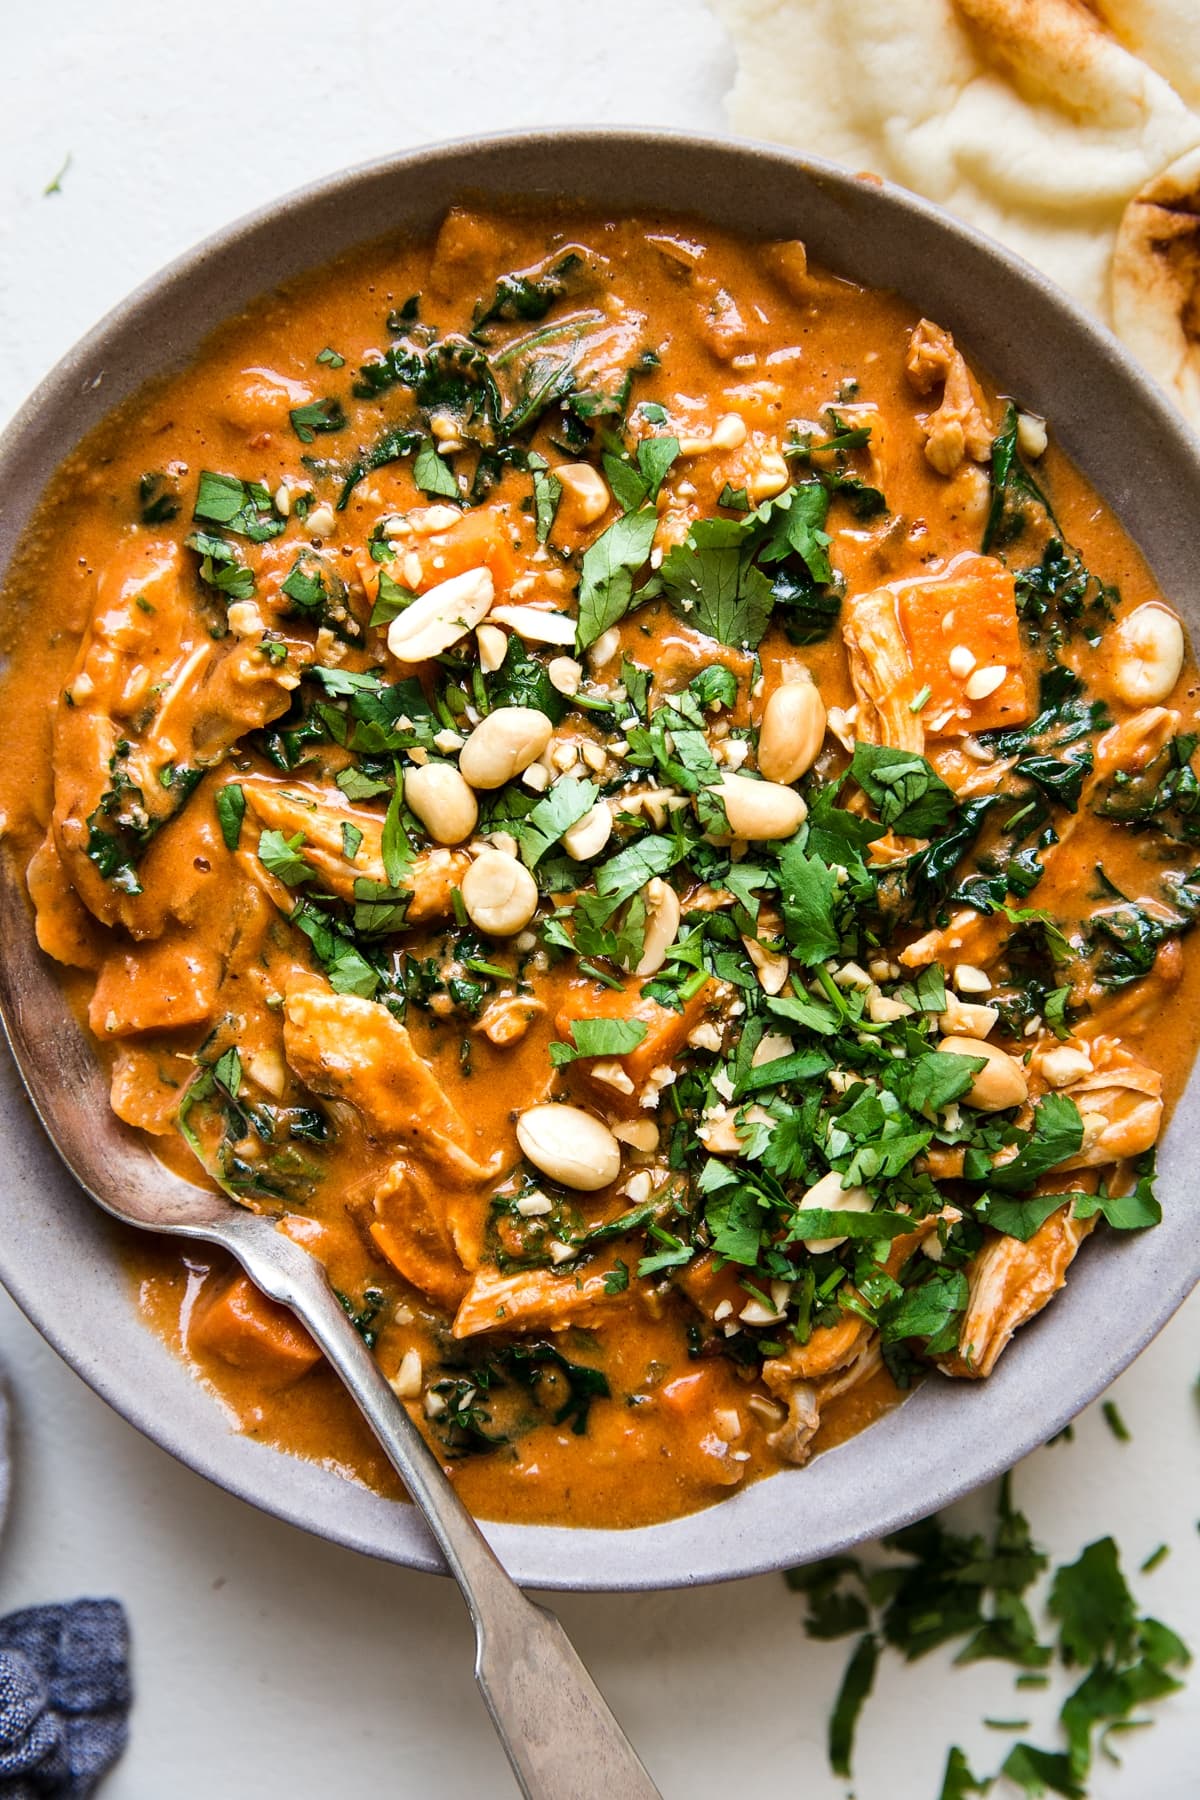 African Peanut Soup in a bowl with ginger, garlic, cumin, crushed tomatoes, sweet potatoes, chickpeas, chicken, kale.